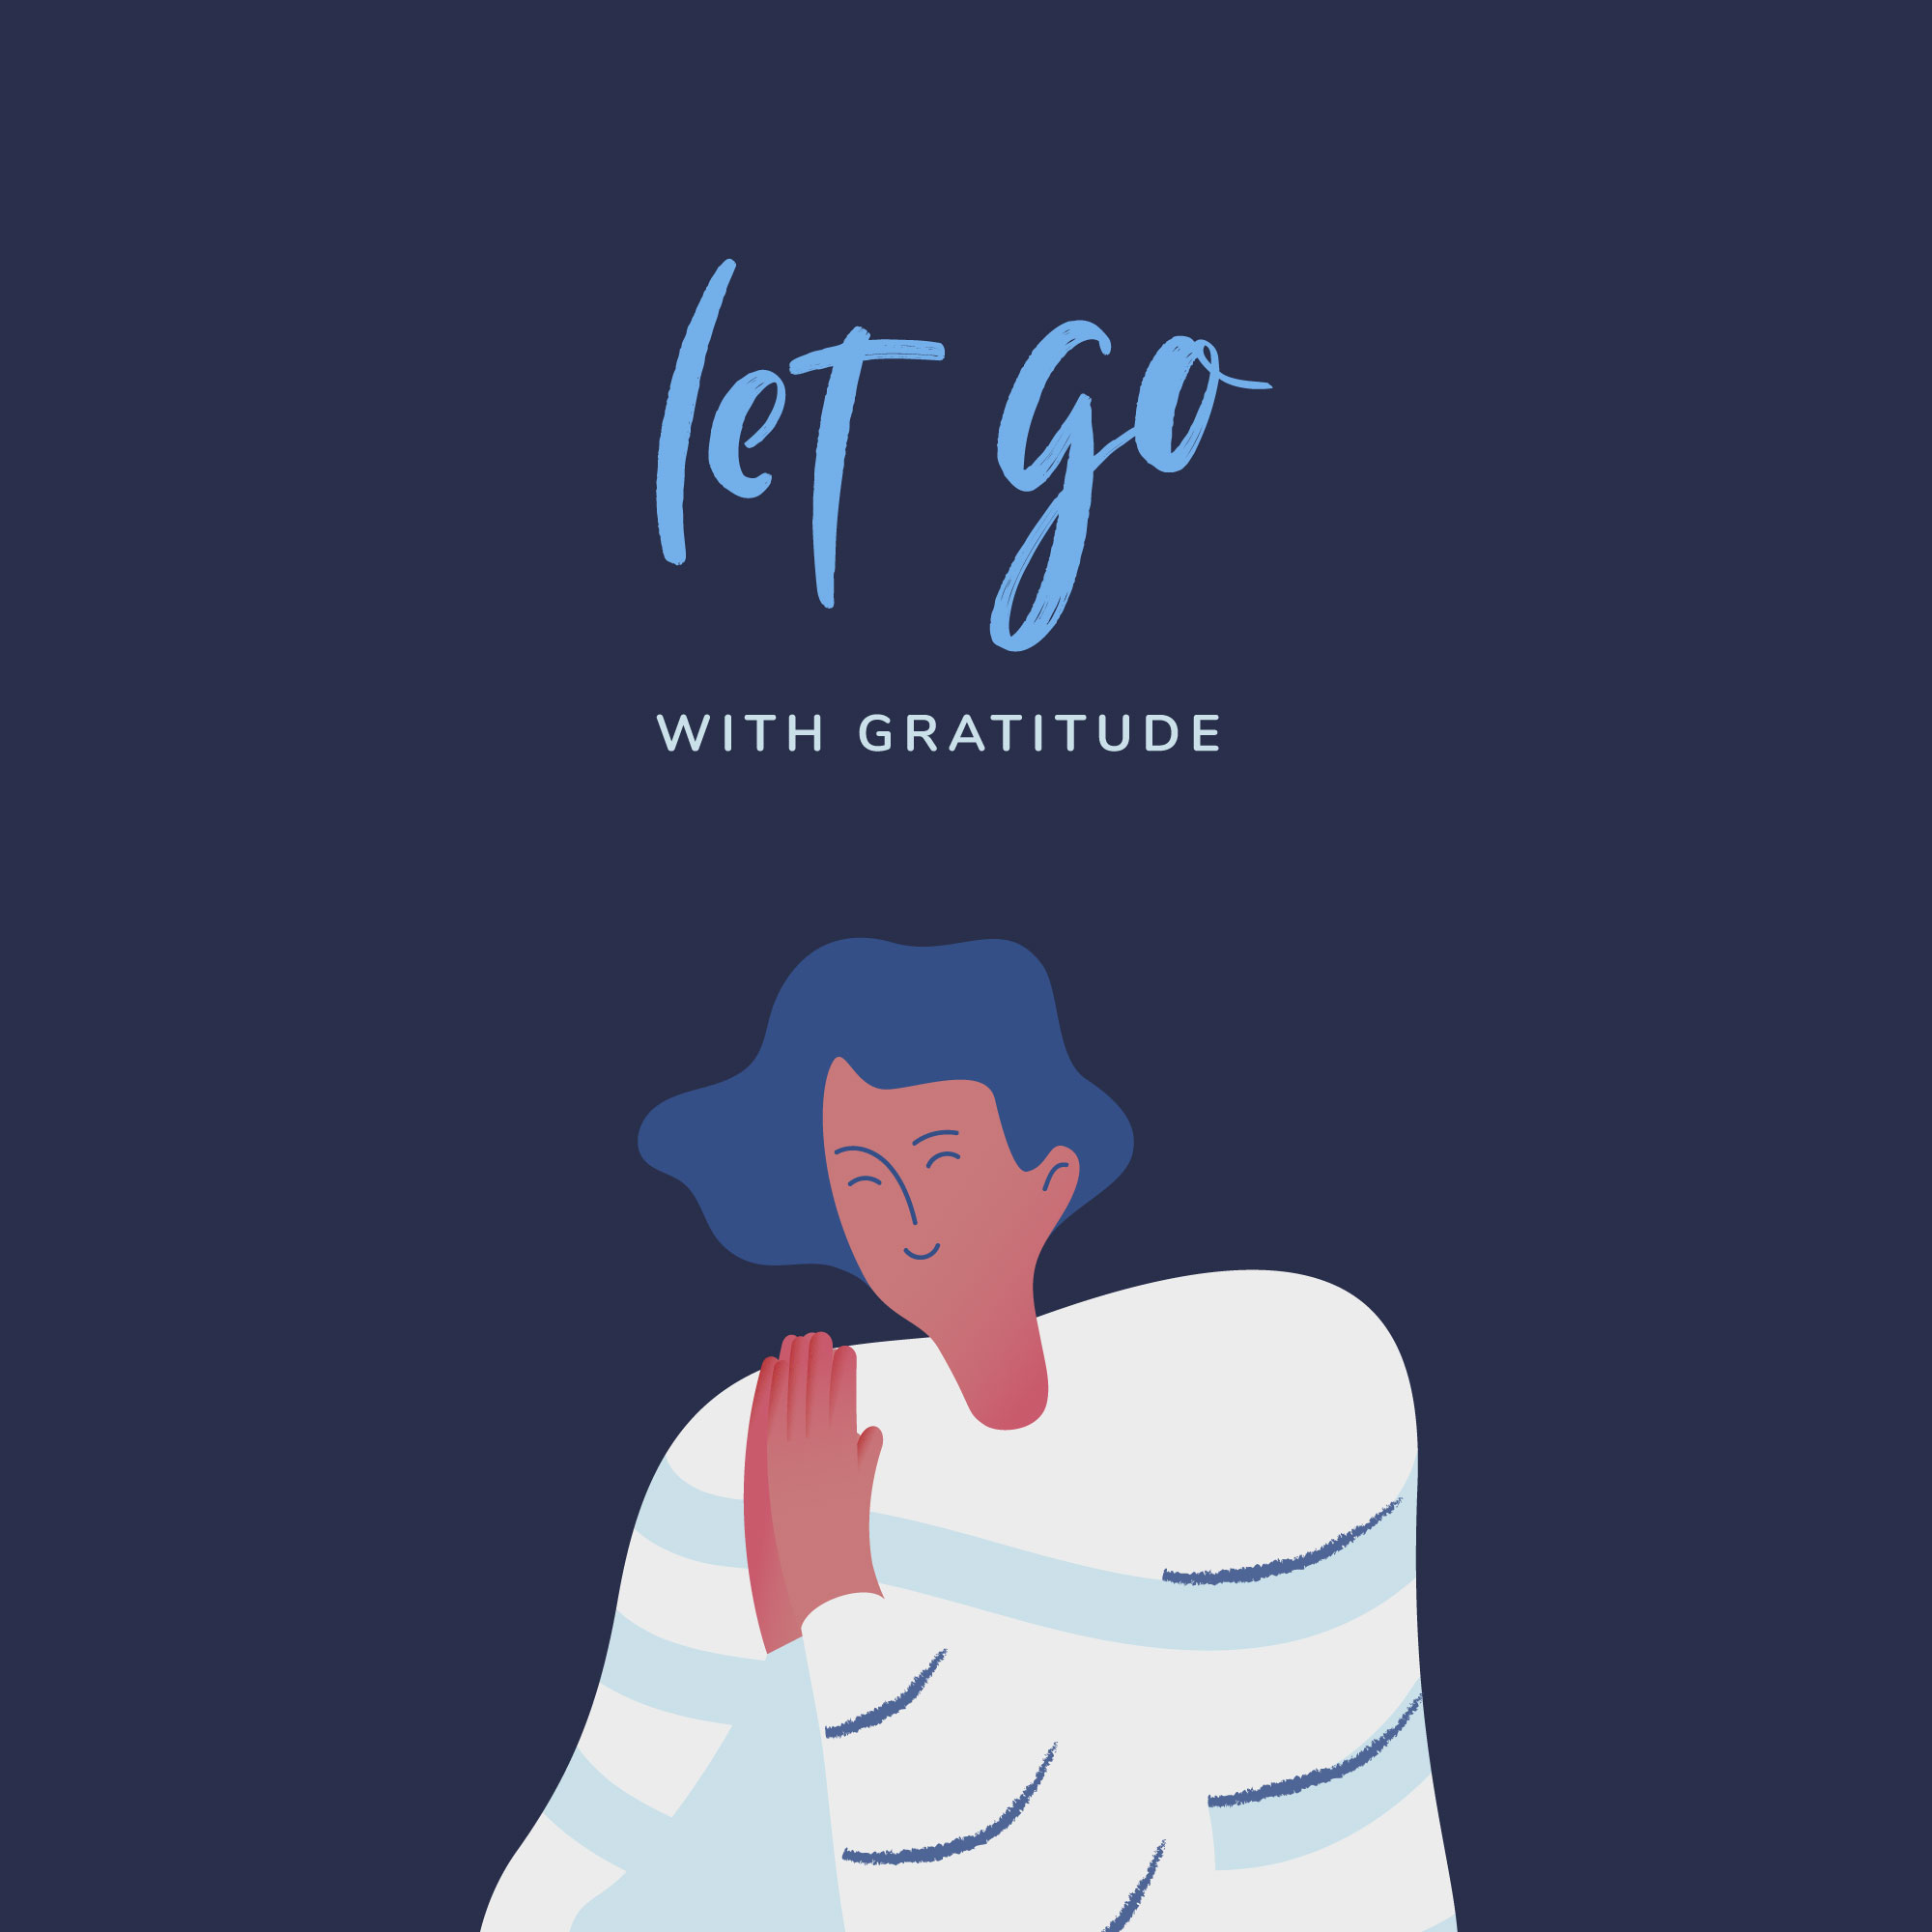 let go with gratitude